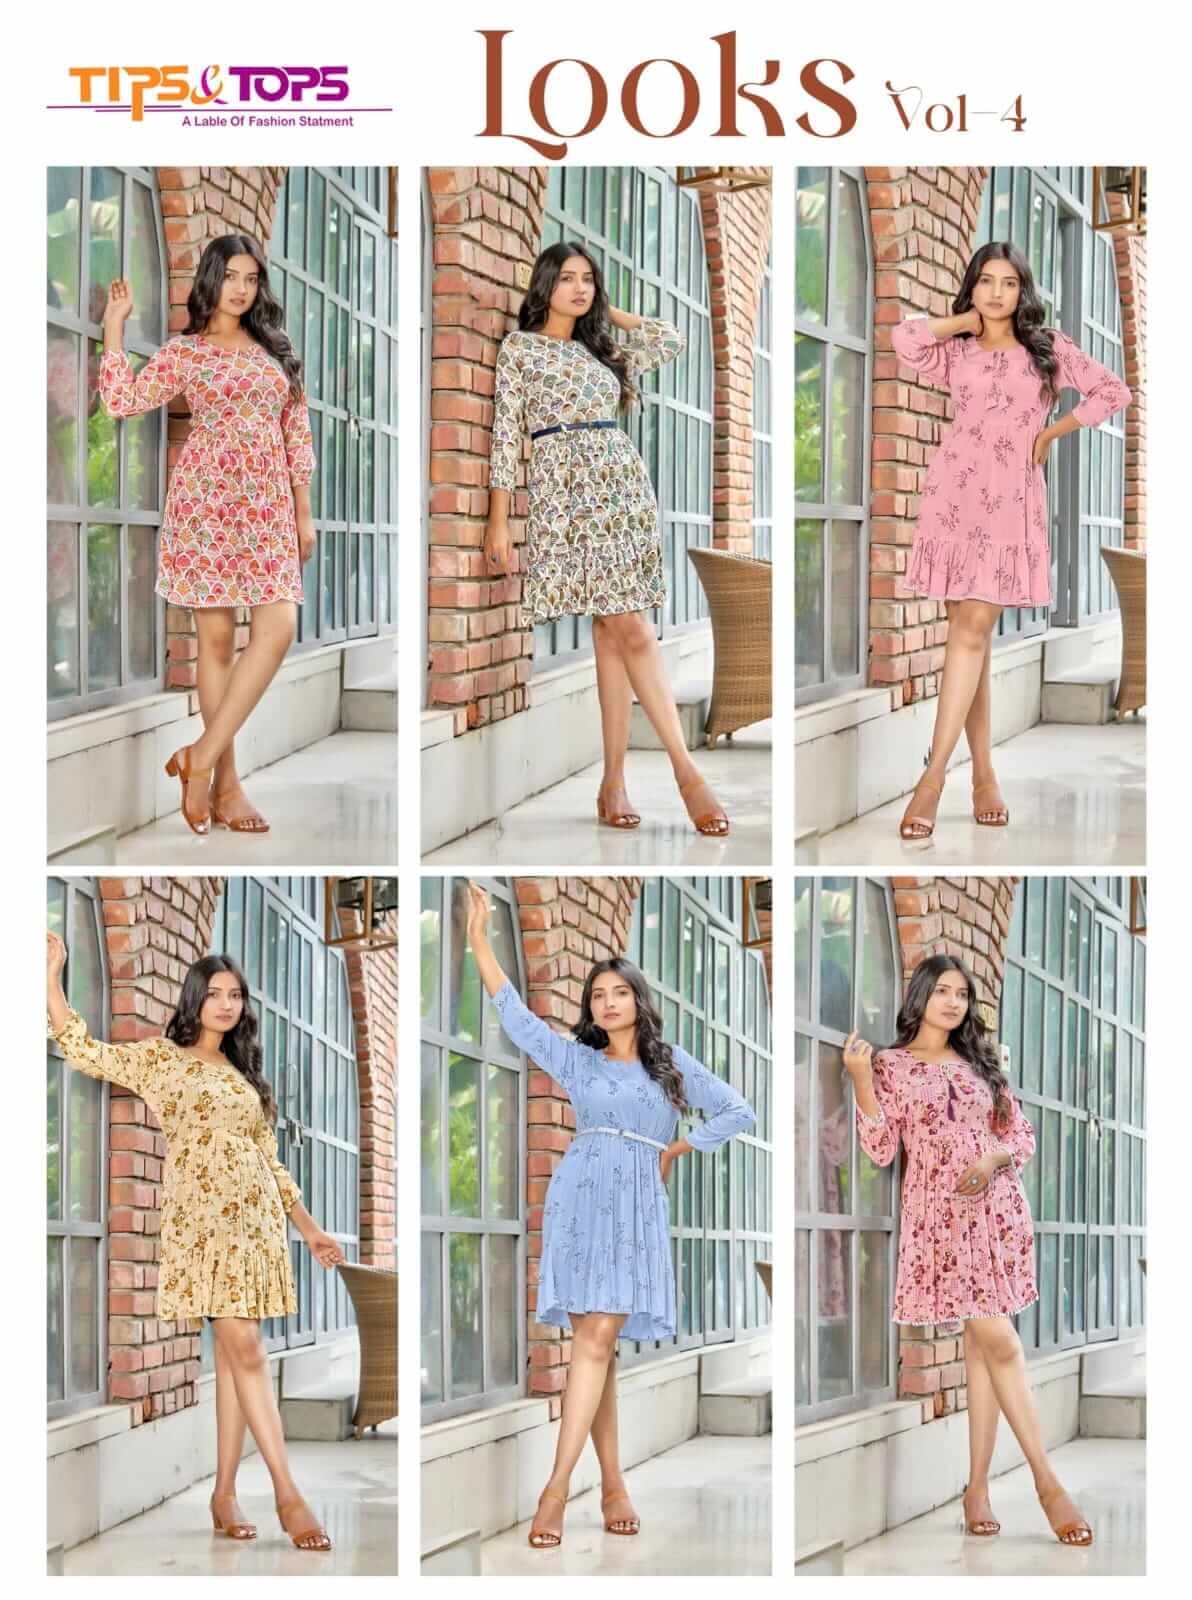 Tips And Tops Looks Vol 4 One Piece Dress Catalog collection 4